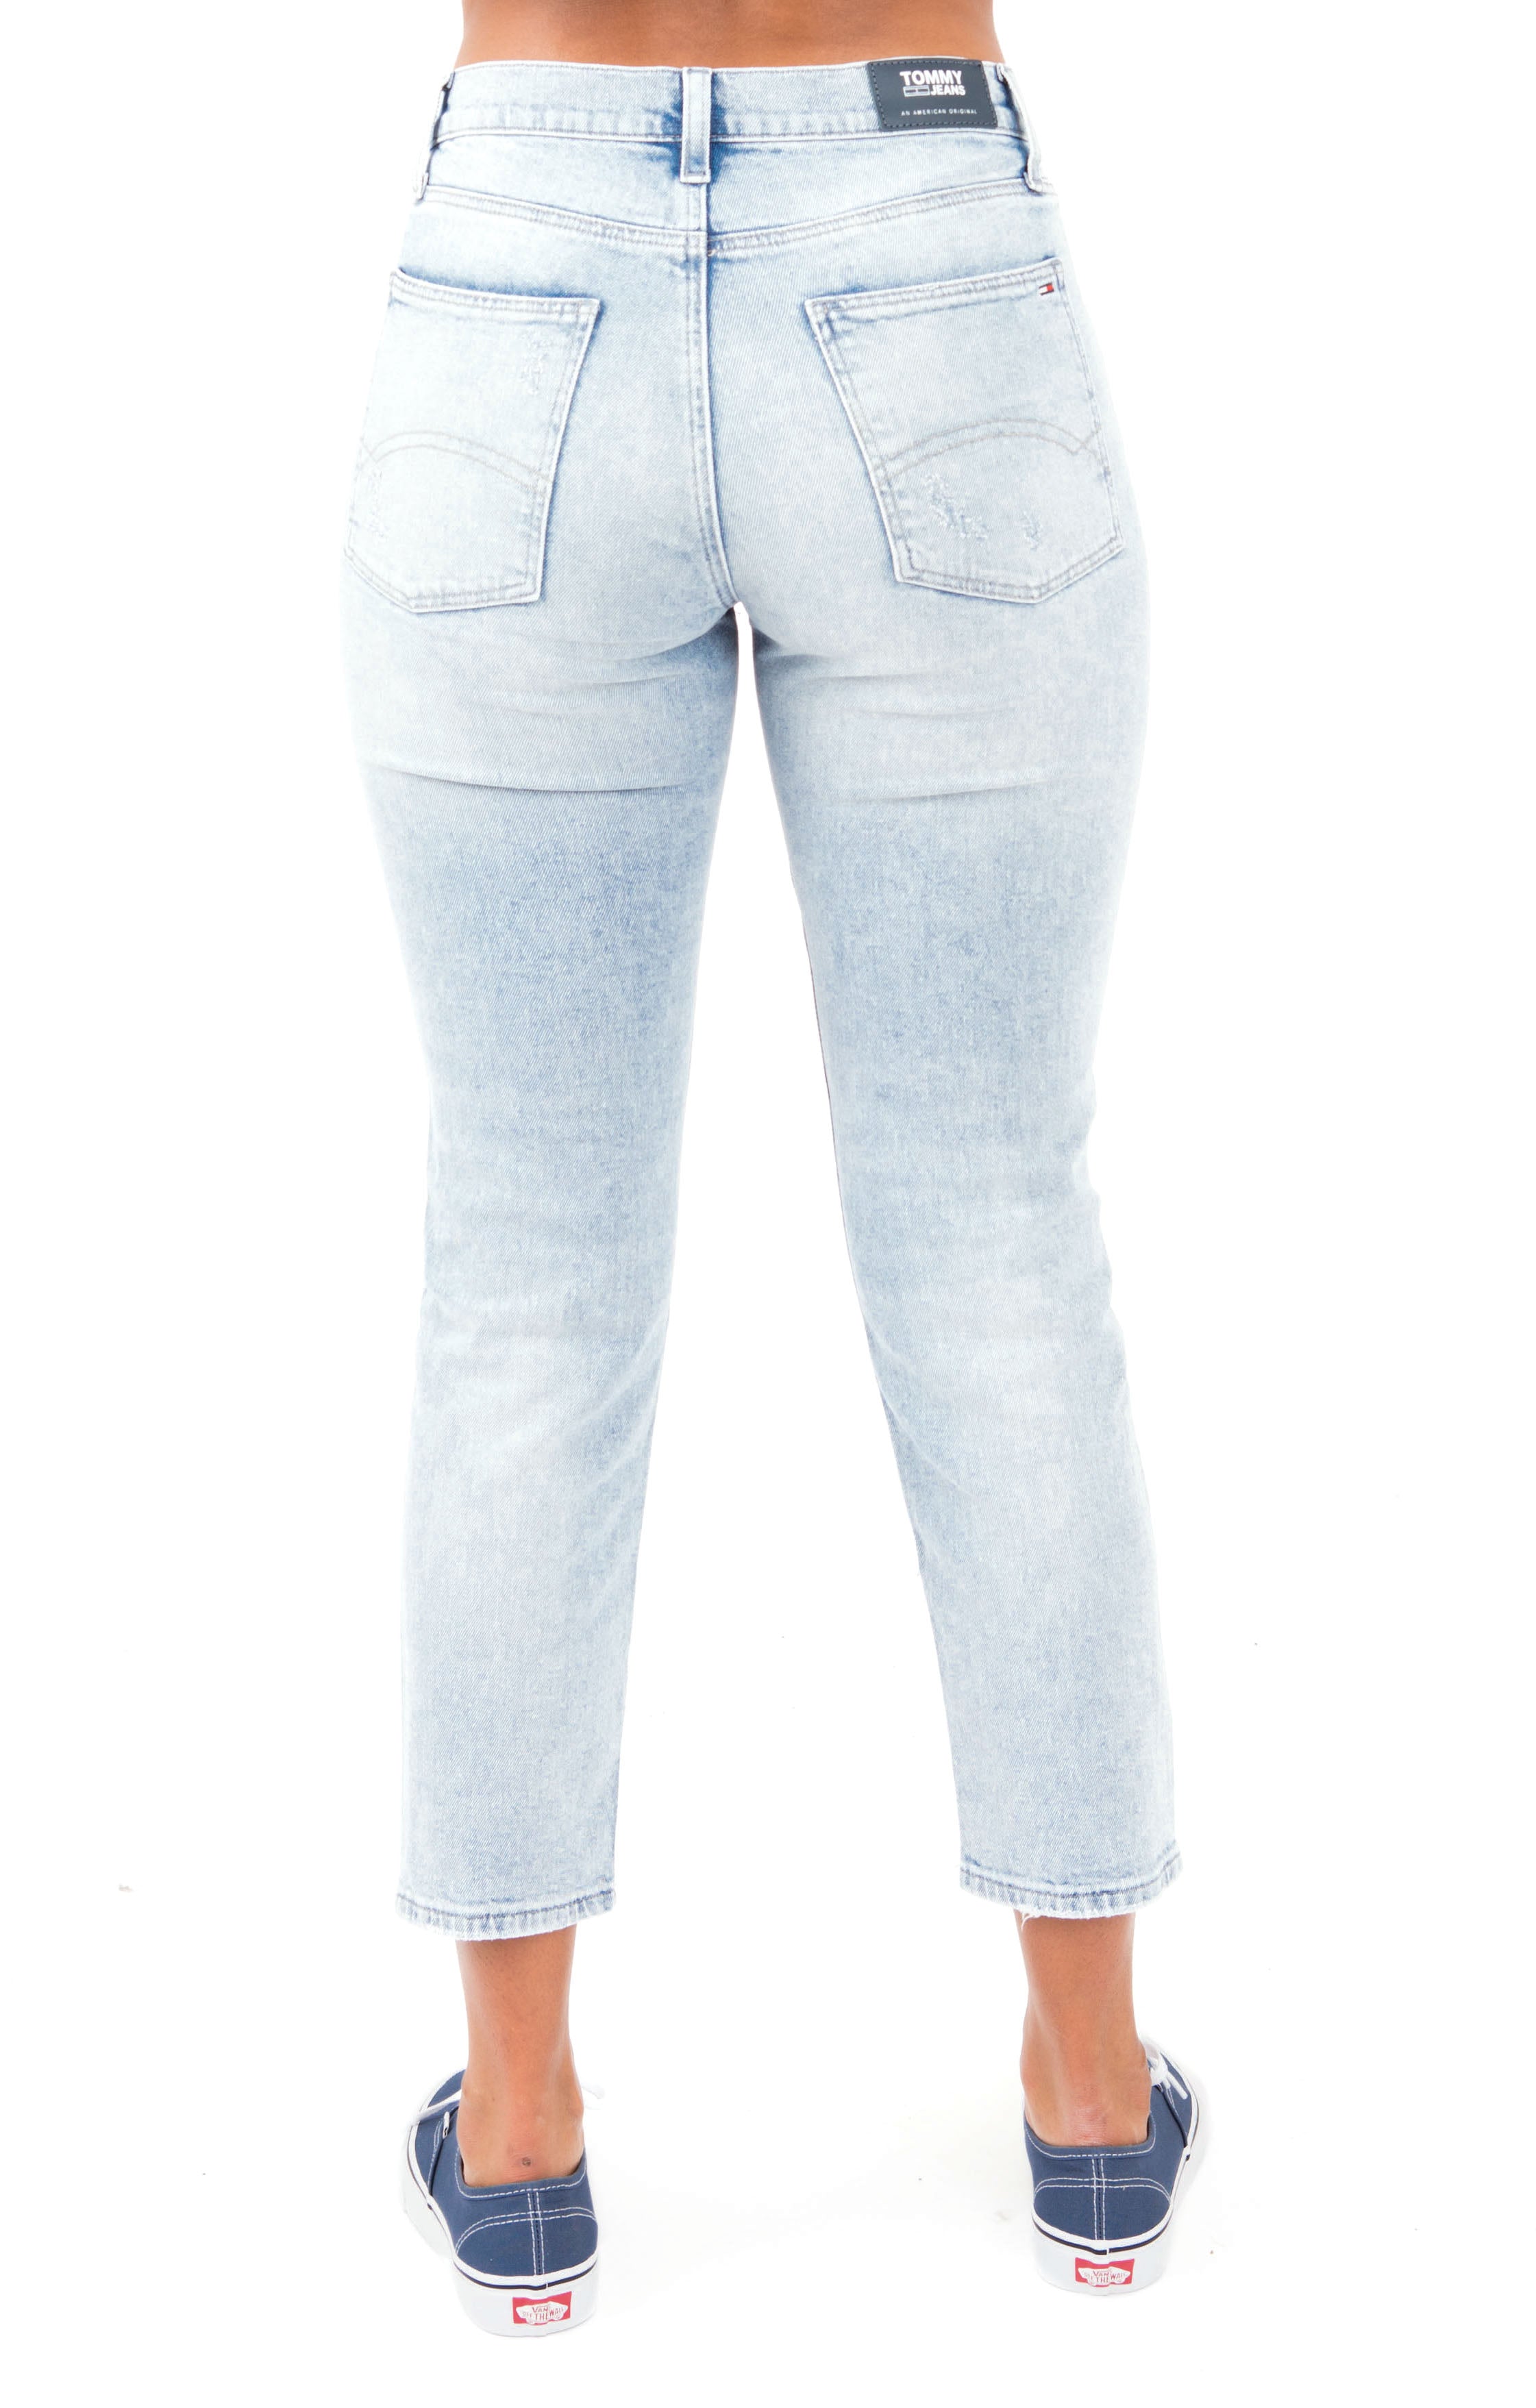 (DW04747) 1991 High Rise Straight Fit Jean - Flanders Light Blue